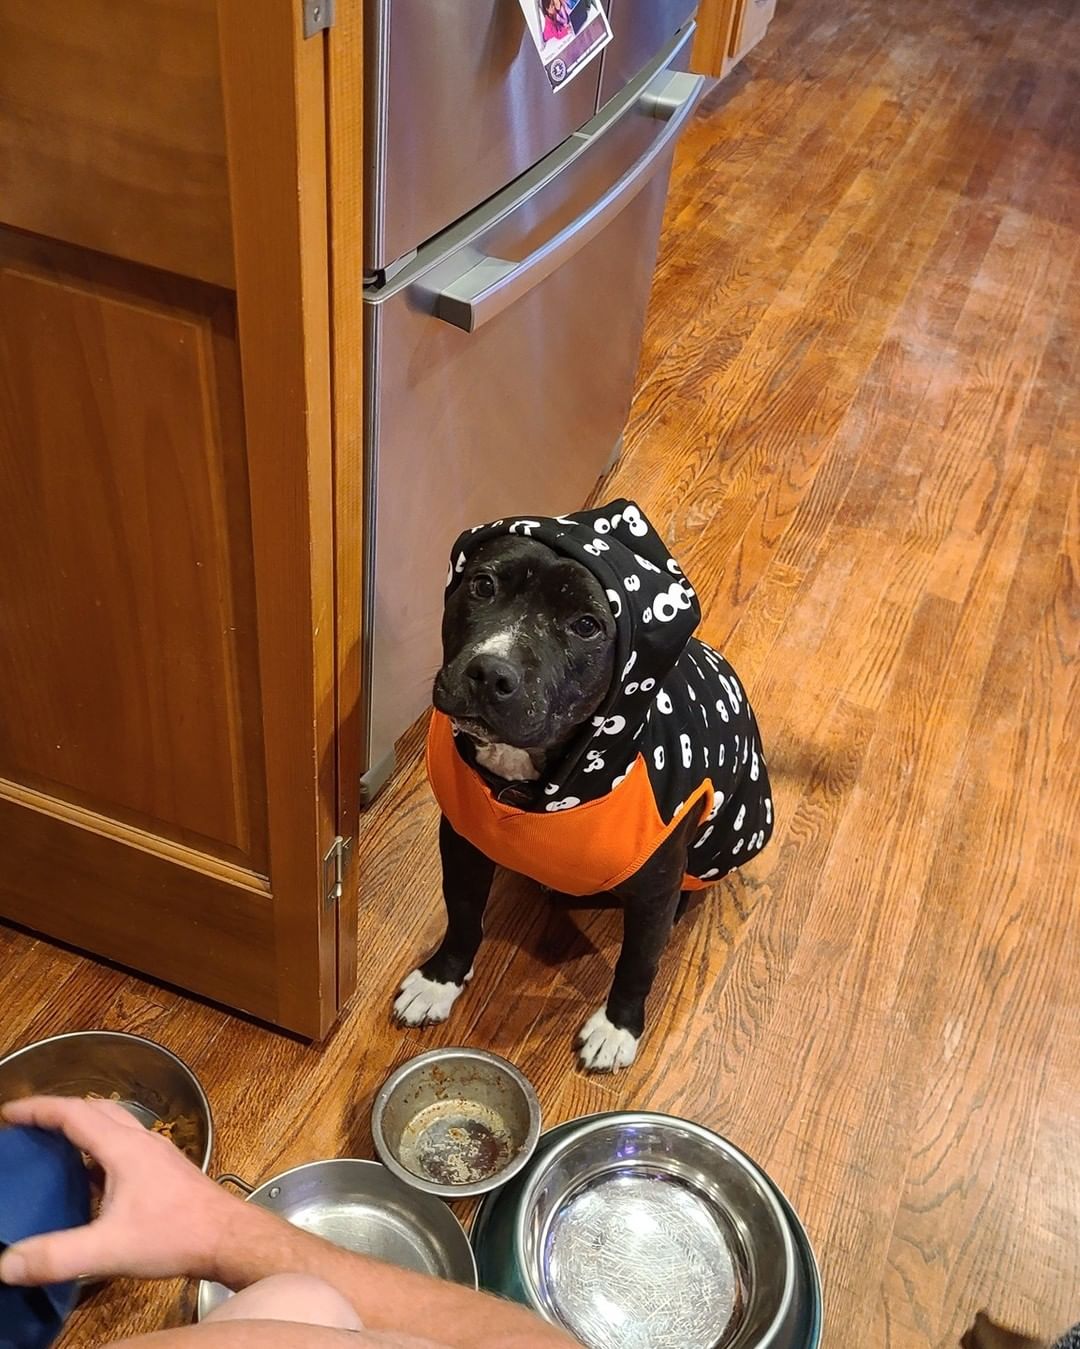 Serena's adopters sent over an update: Just wanted to update on how much we are so in love with our Serena and how ADORABLE she is.  Since she has to be the center of attention at all times, we figured this dog hoodie was very suitable for her for this winter.  Even my husband who took some coaxing to convince we 